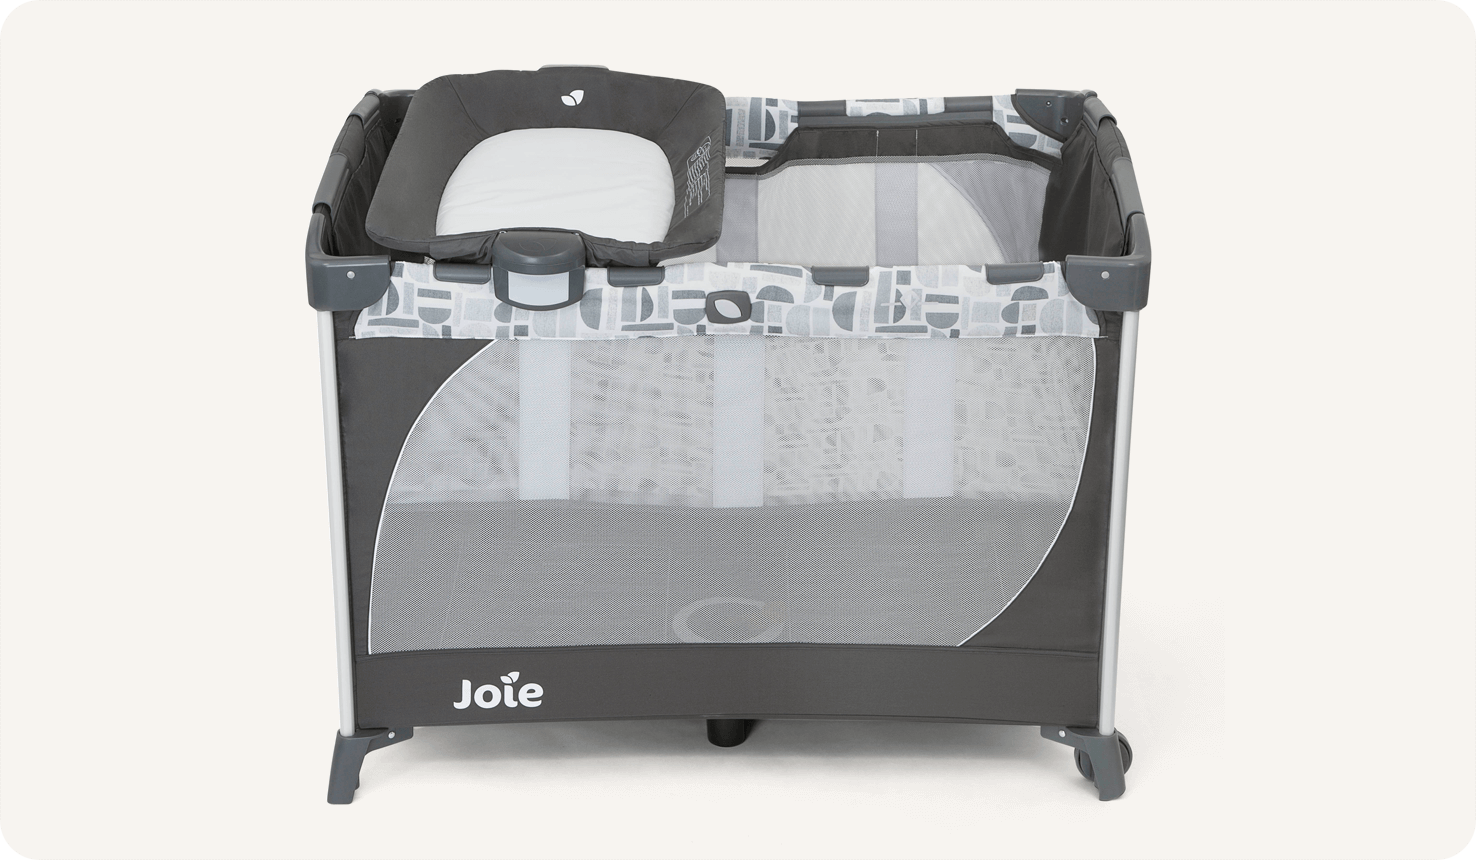 The Joie travel cot commuter change in grey and blue pattern with a bassinet and changer at side and top view.